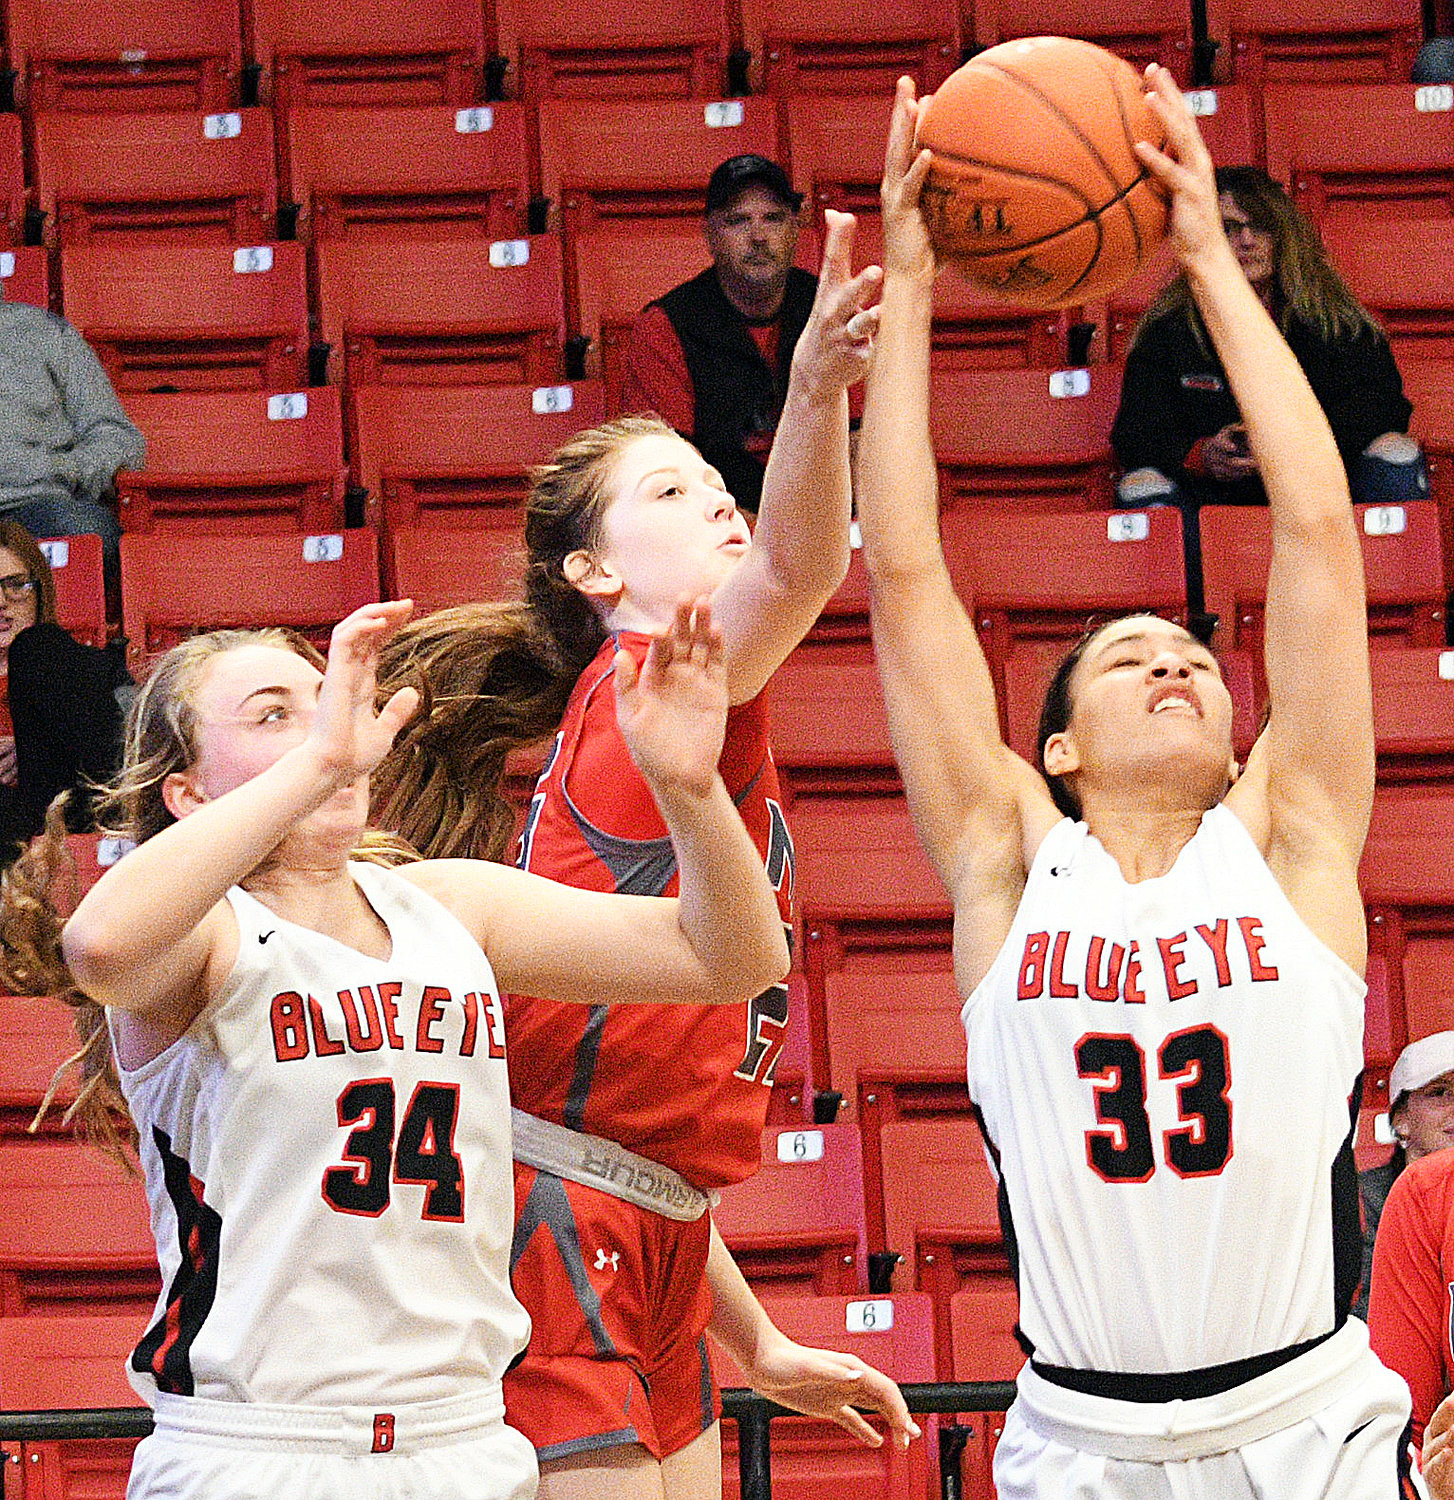 NORAH CLARK tries to grab a rebound away from a Blue Eye player.